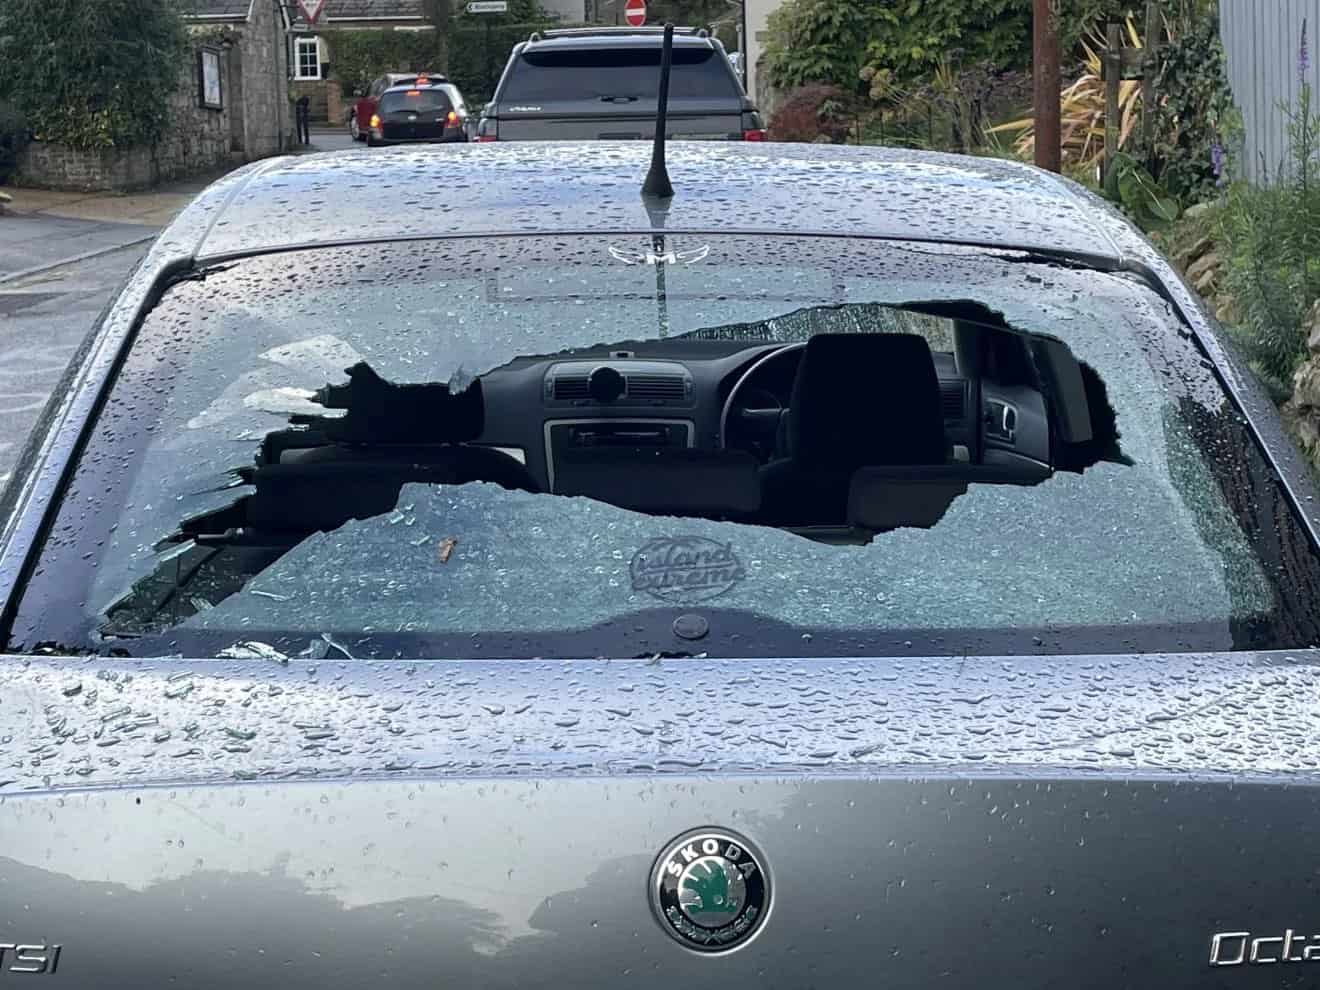 Cars in Niton with smashed windscreens